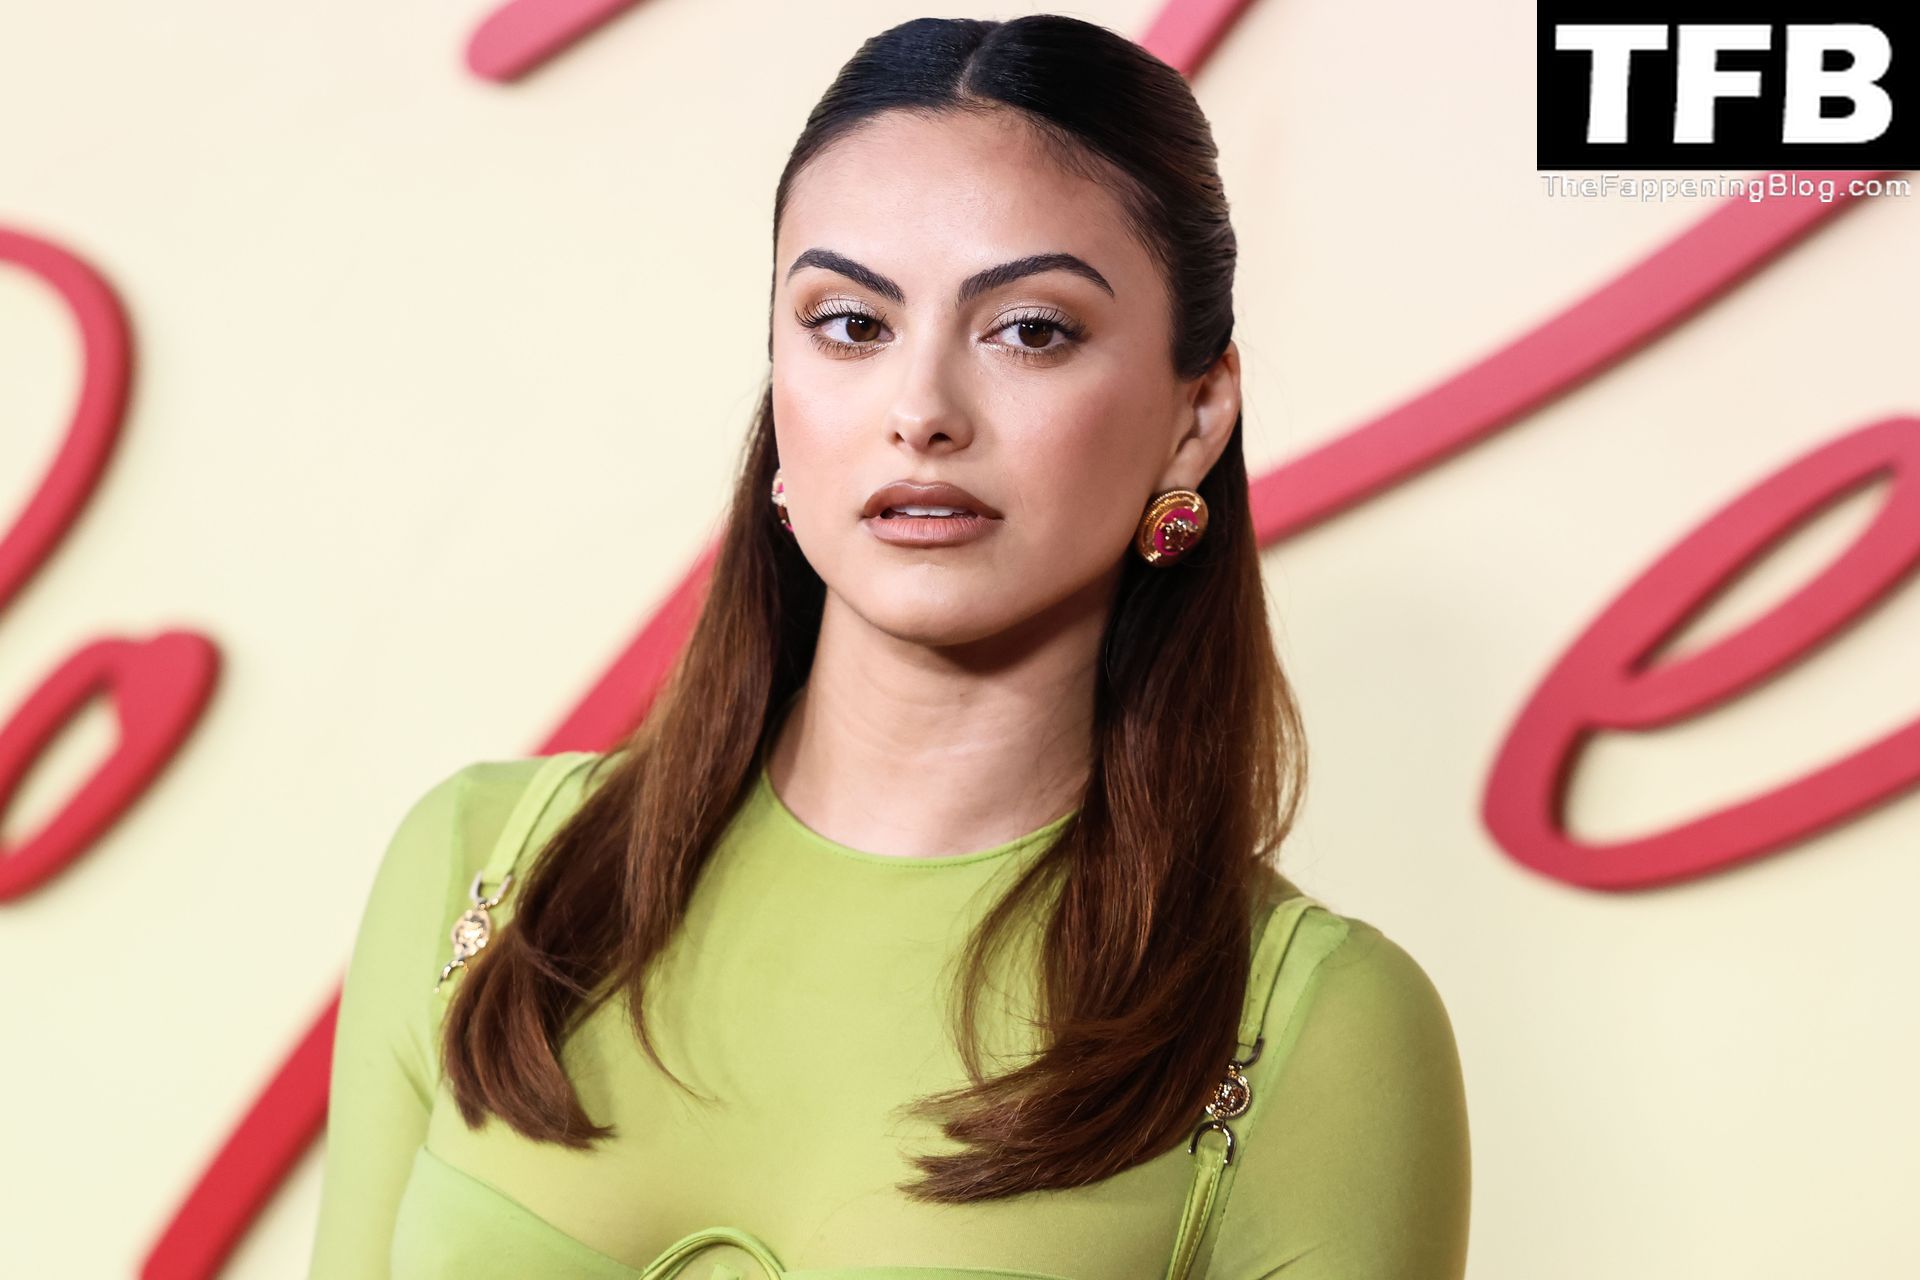 Camila-Mendes-Sexy-The-Fappening-Blog-119.jpg